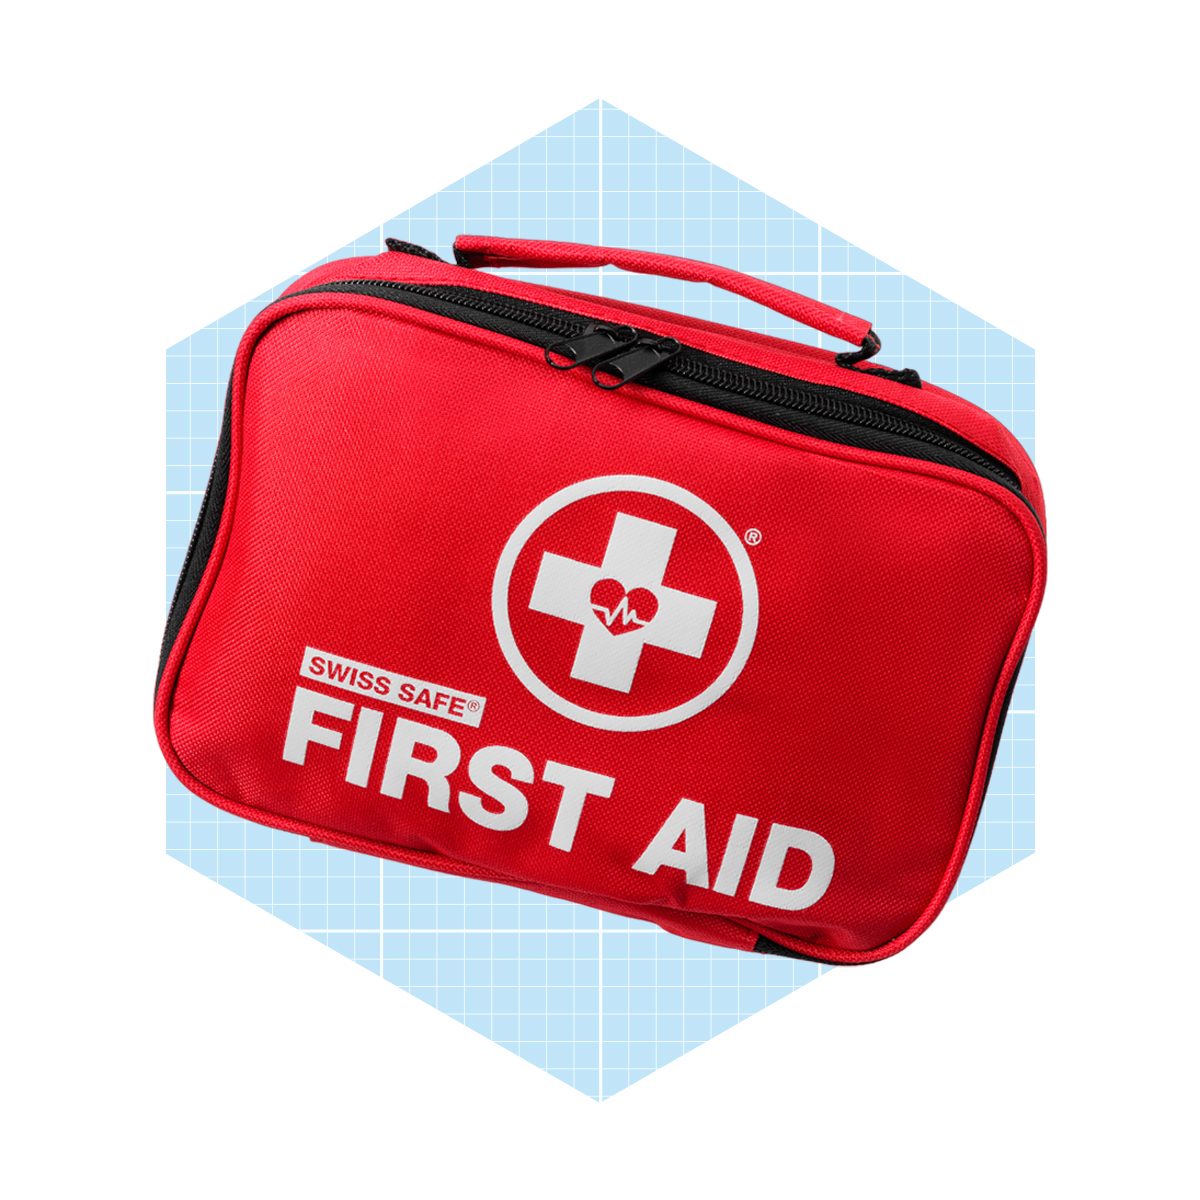 Is Your Car's First Aid Kit Ready for Winter?